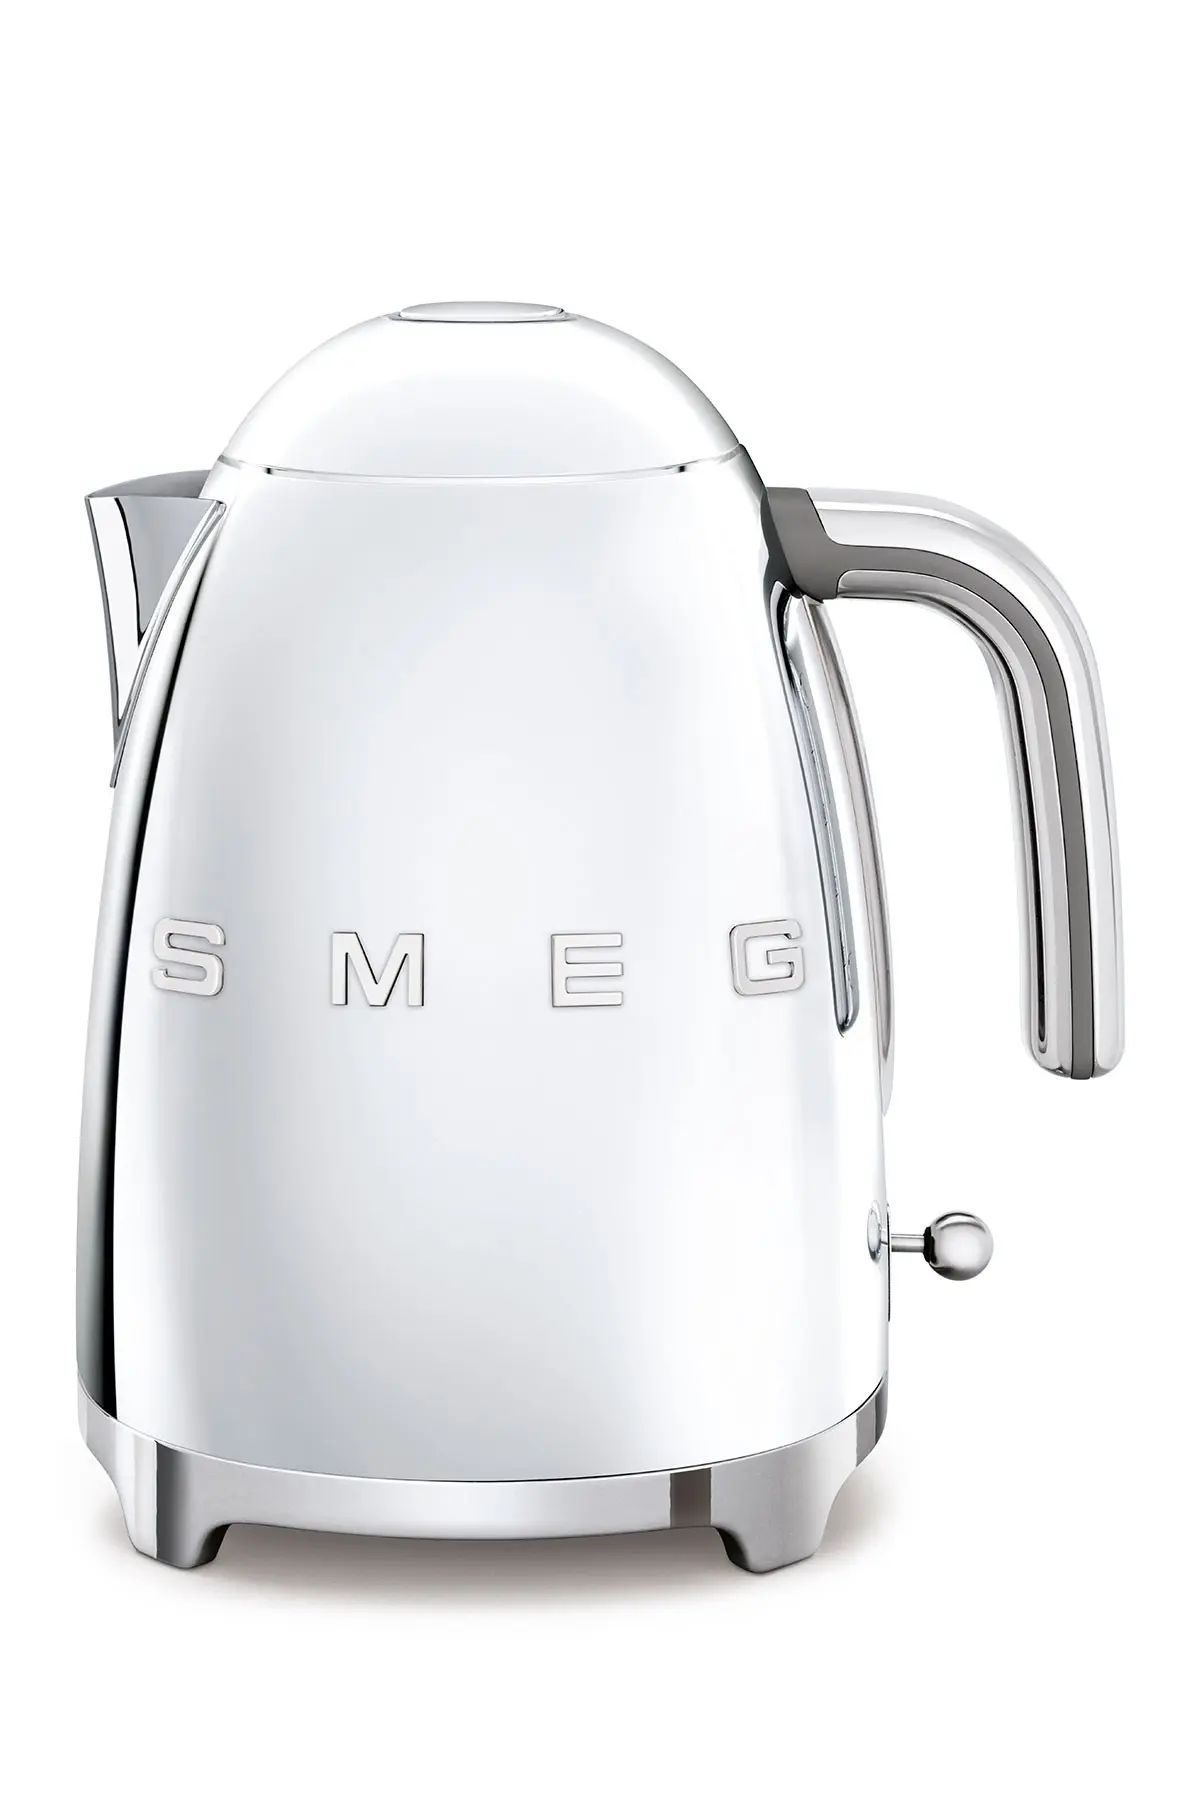 smeg '50s Retro Style Electric Kettle in Stainless Steel at Nordstrom | Nordstrom